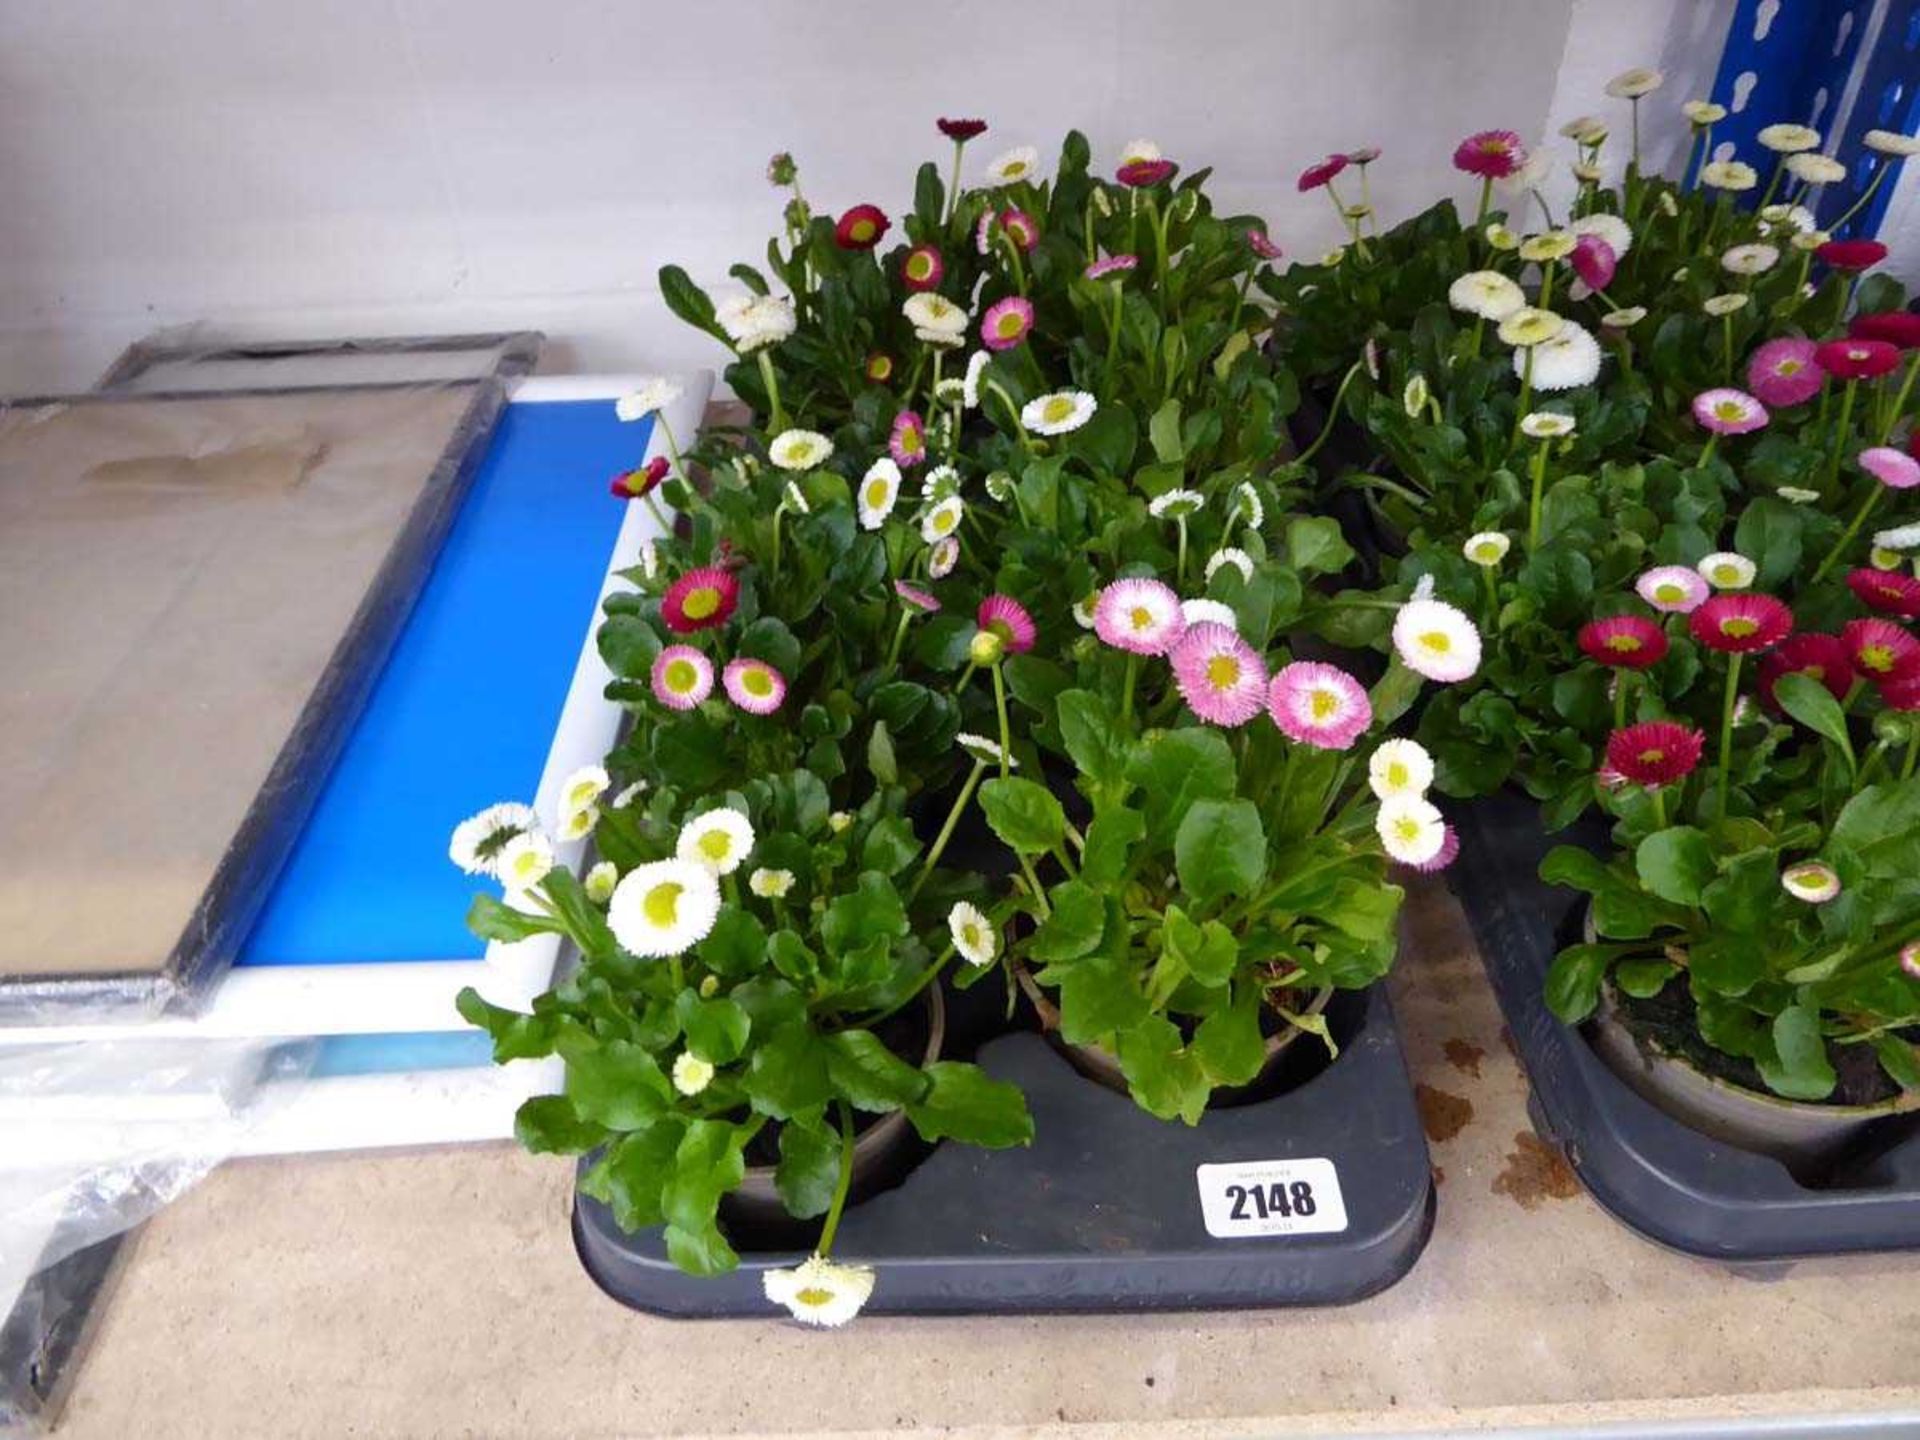 Tray containing 8 pots of Bellis daisies